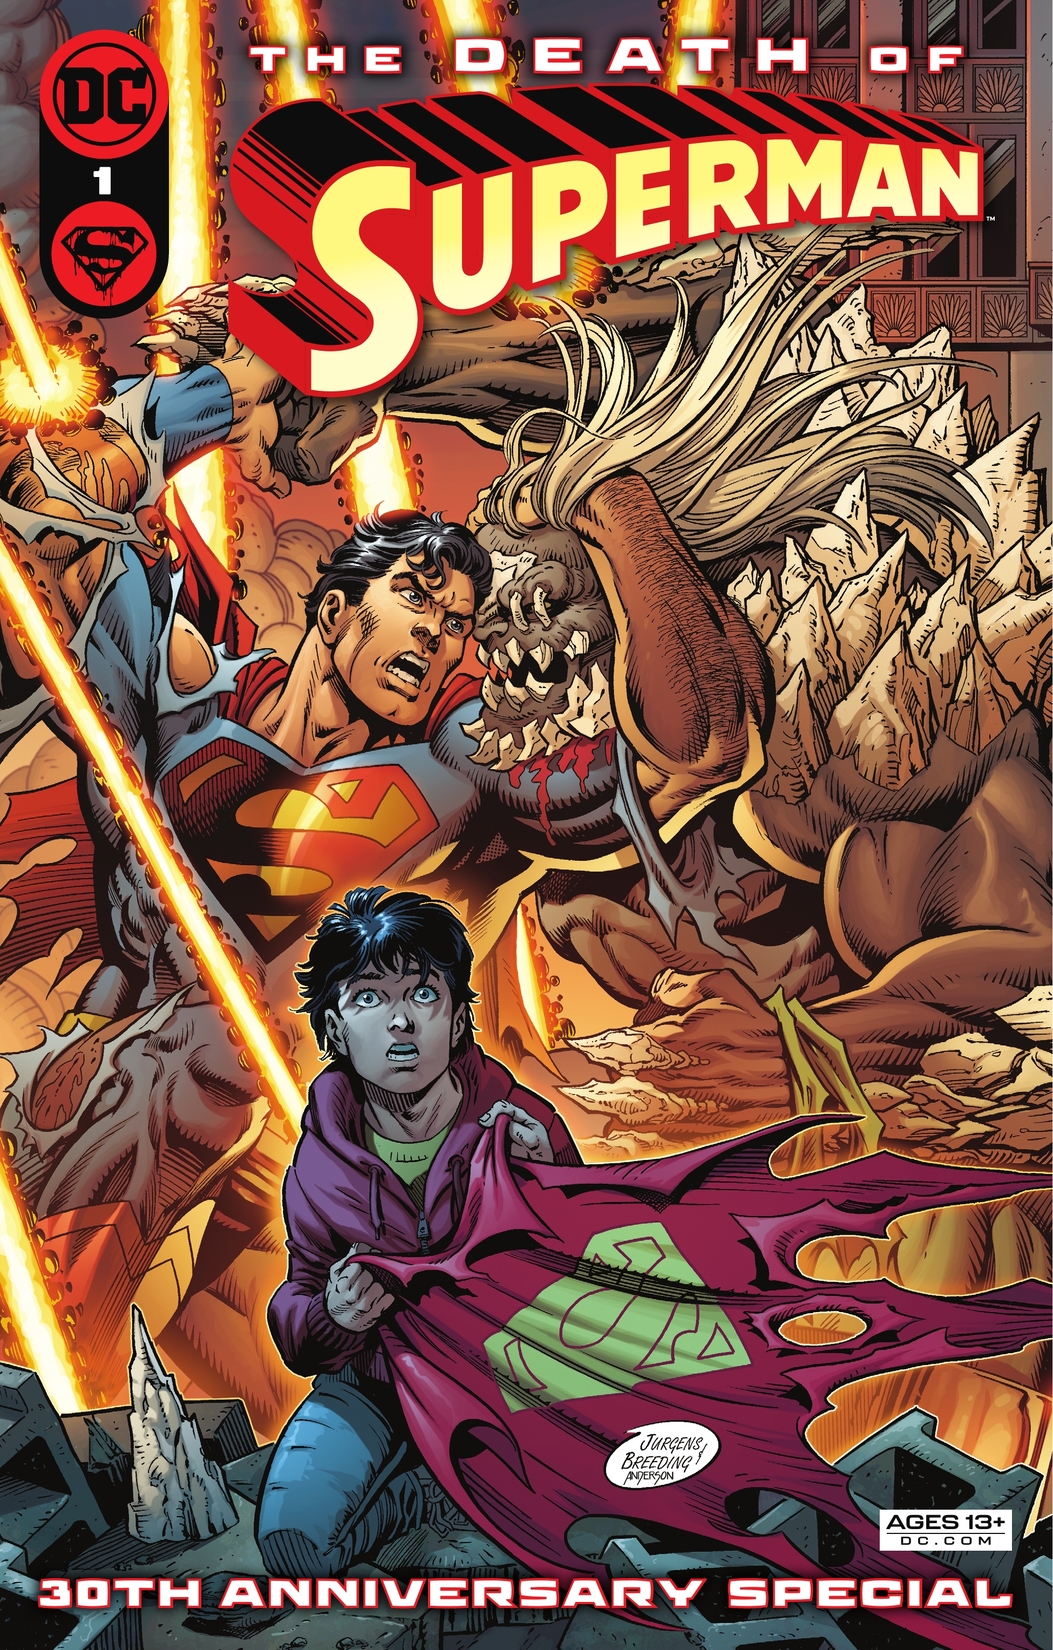 The Death of Superman 30th Anniversary Special #1 preview images